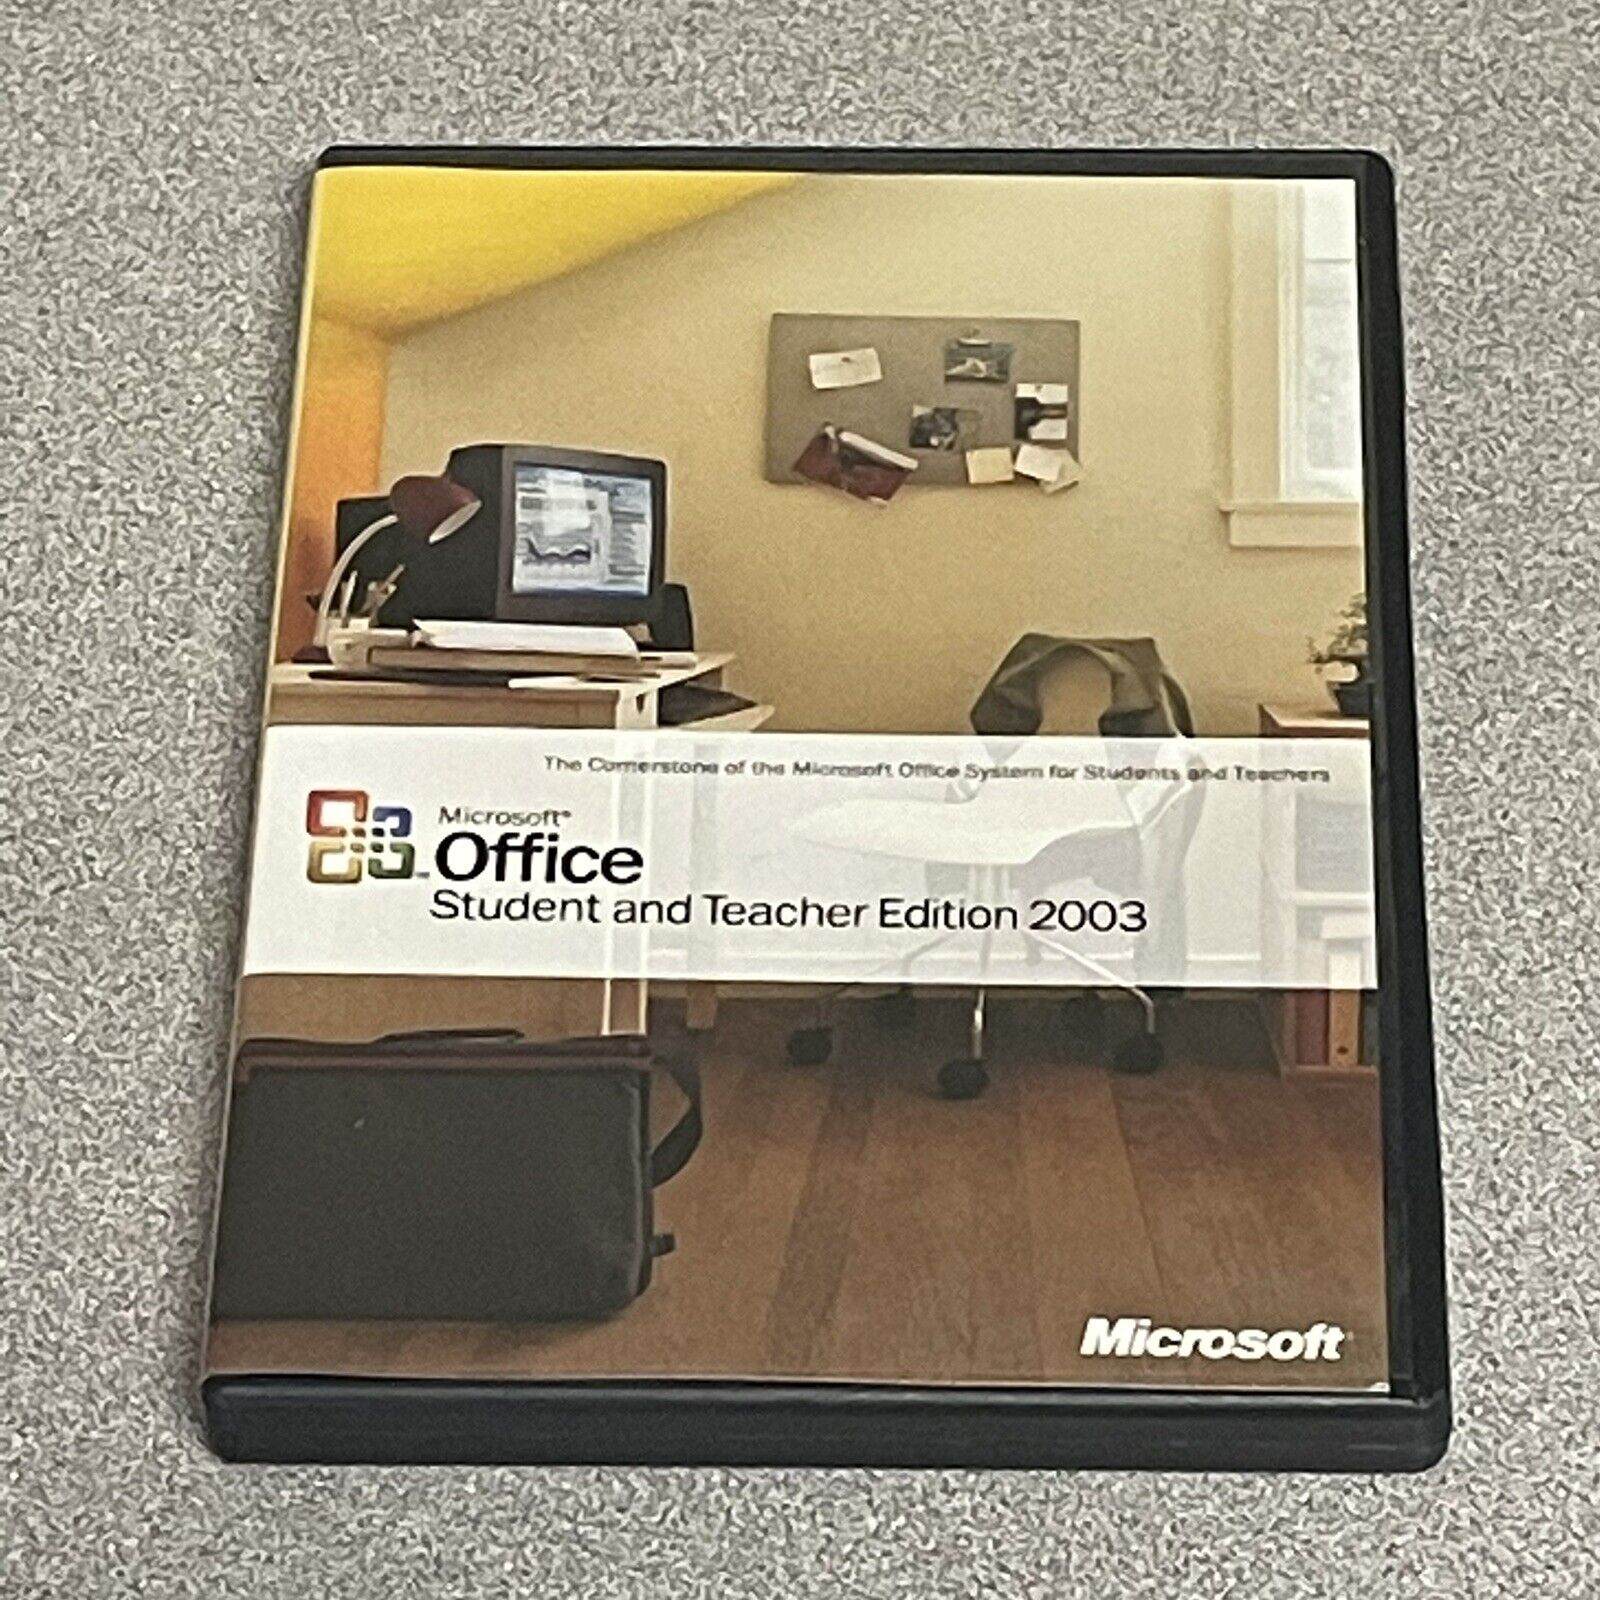 Microsoft Office Student and Teacher Edition 2003 for Windows